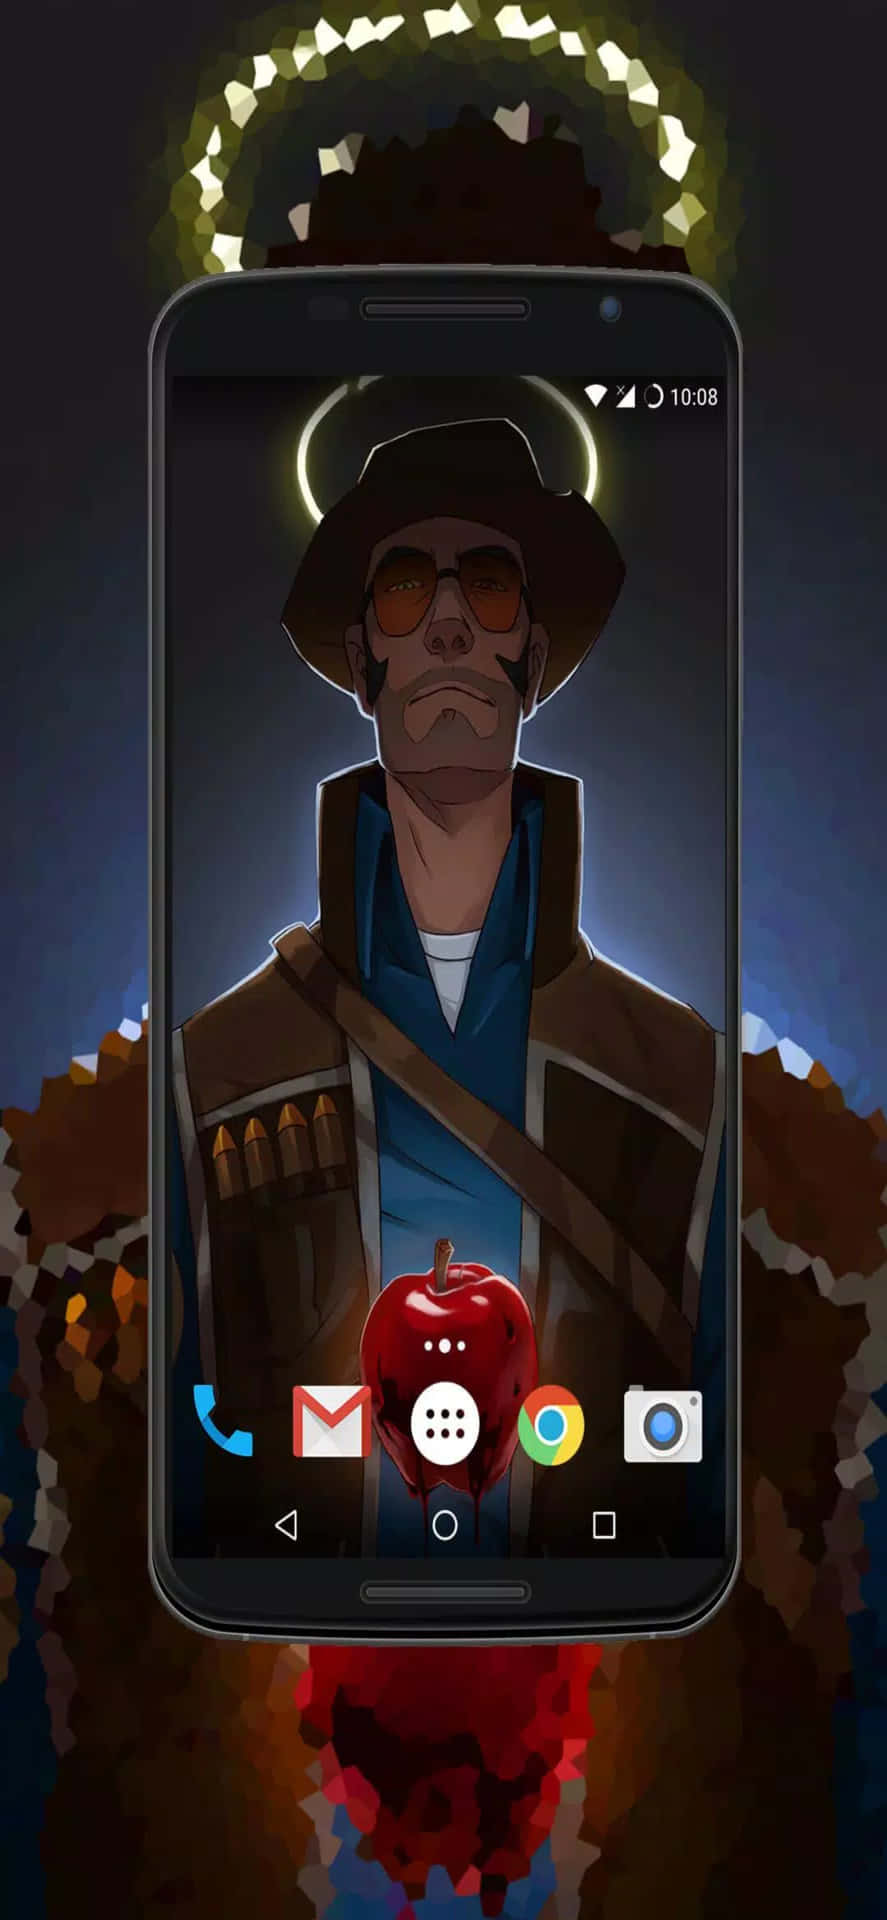 Iphone Xs Tf2 Background Android Screen With The Sniper